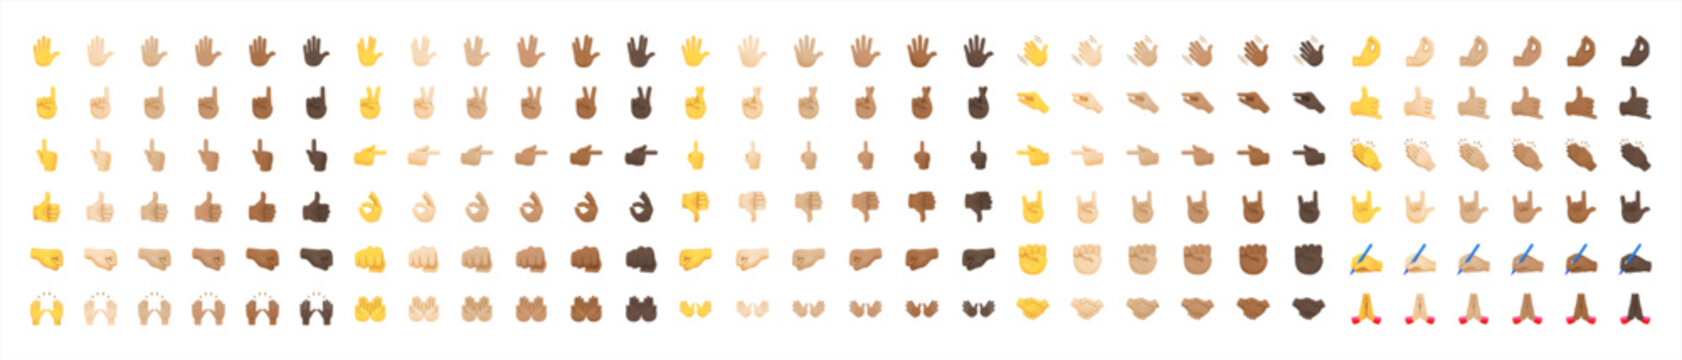 All hand emojis, stickers in all skin colors. Hand emoticons vector illustration symbols set, collection. Hands, handshakes, muscle, finger, fist, direction, like, unlike, fingers. Vector.